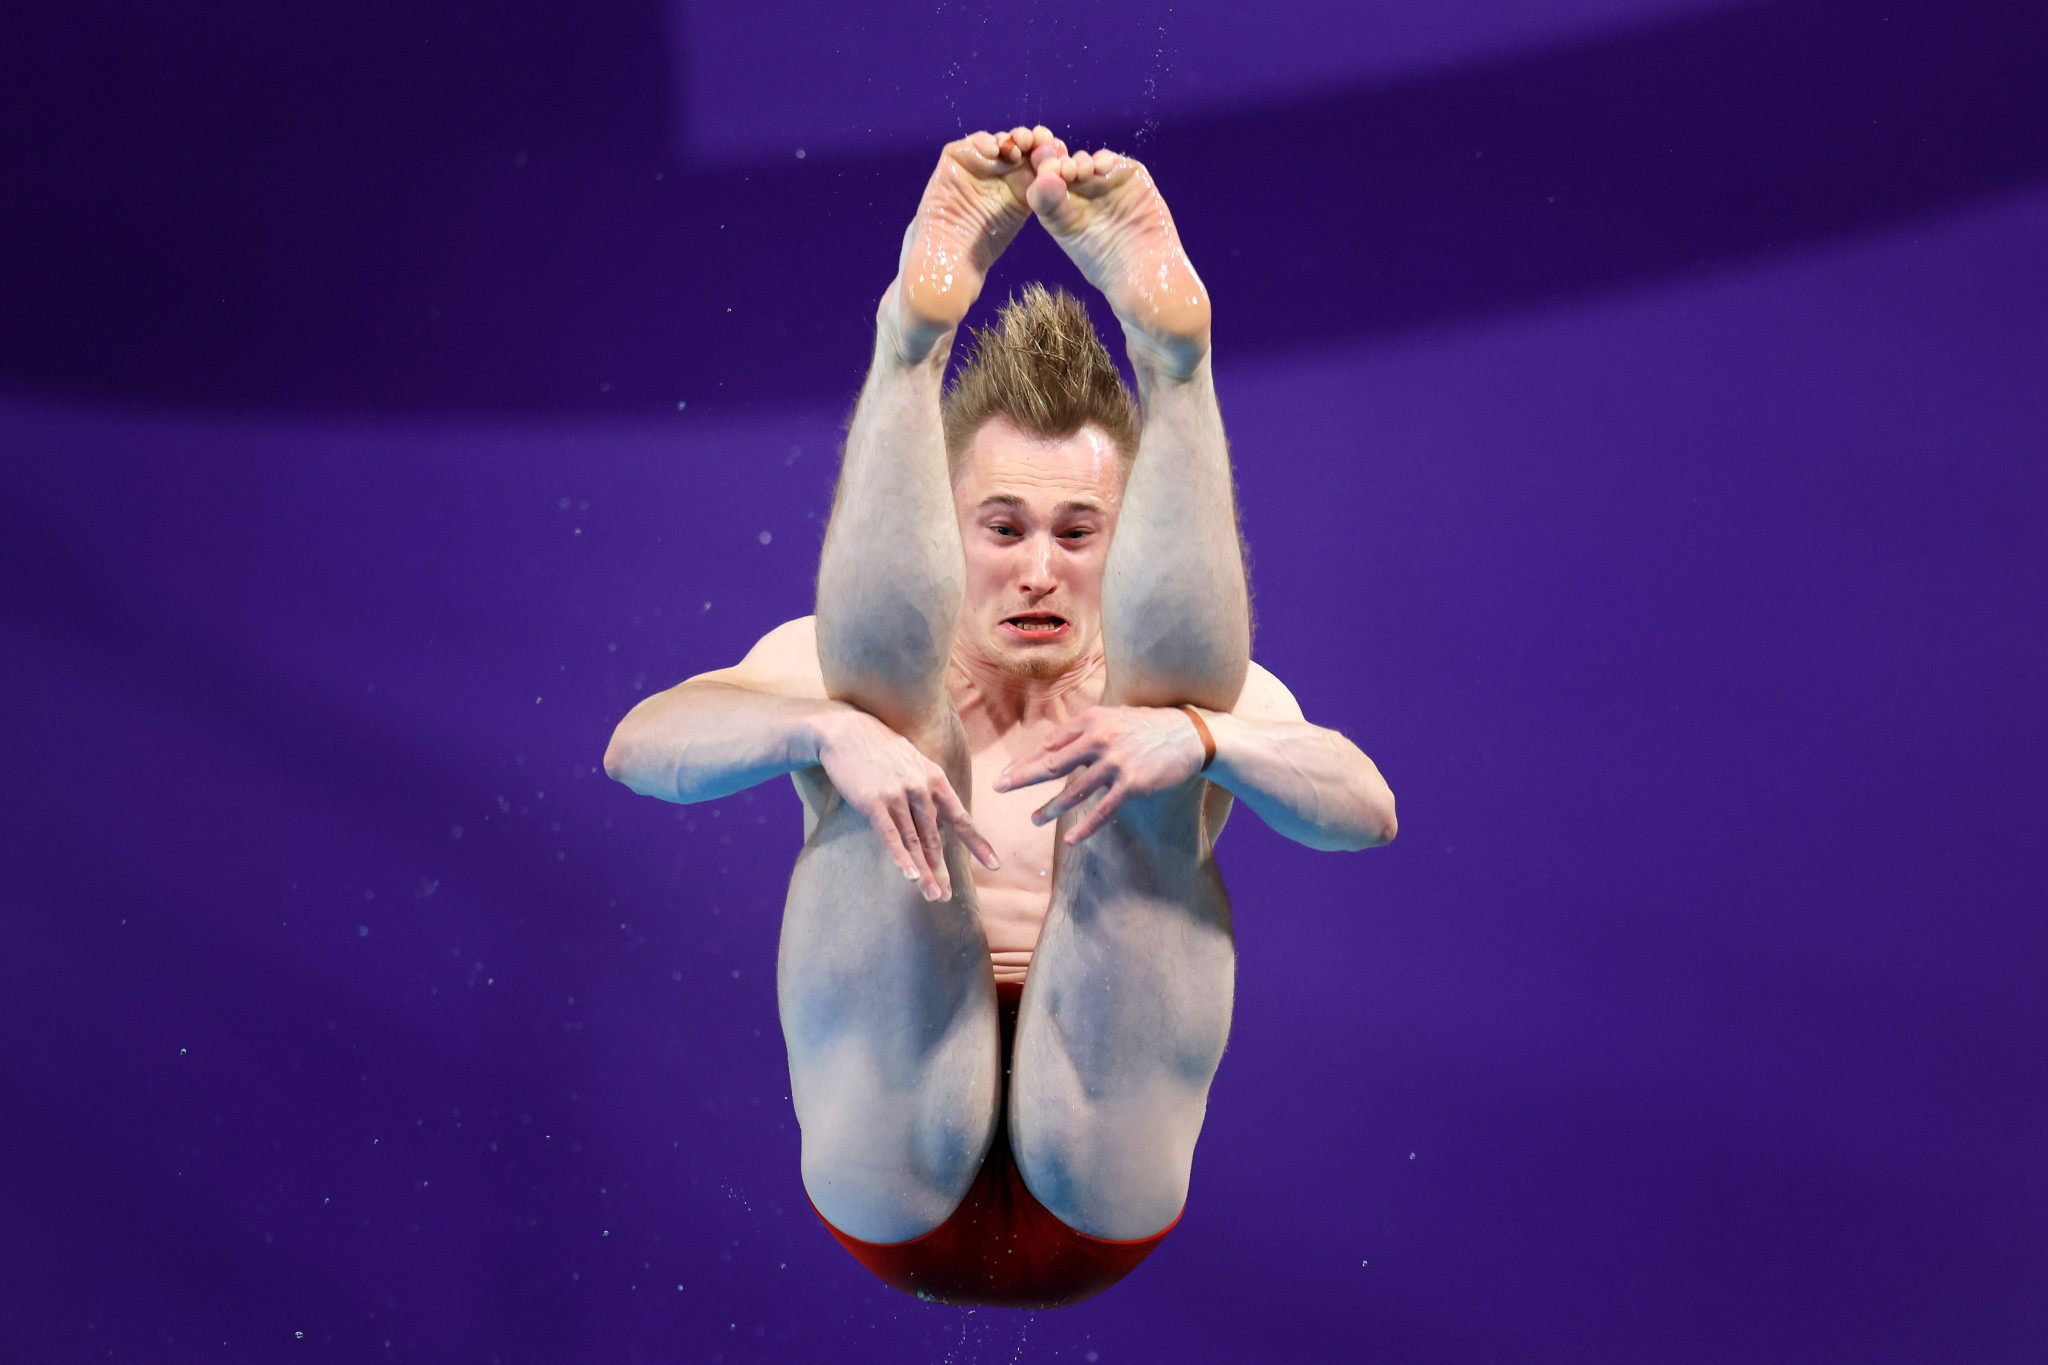 England's Jack Laugher triumphed in the one-metre springboard final at the Sandwell Aquatics Centre ©Getty Images